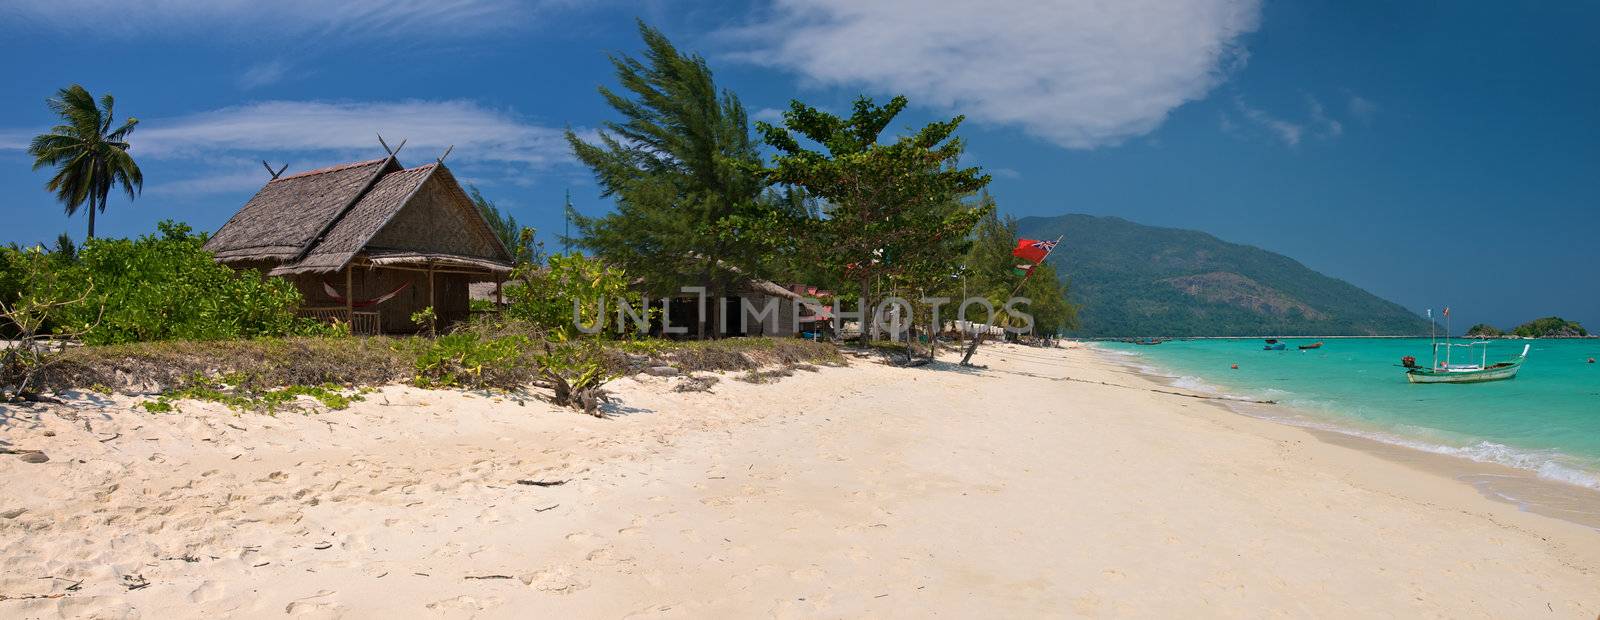 High resolution panoramic image of the tropical beach with white sand